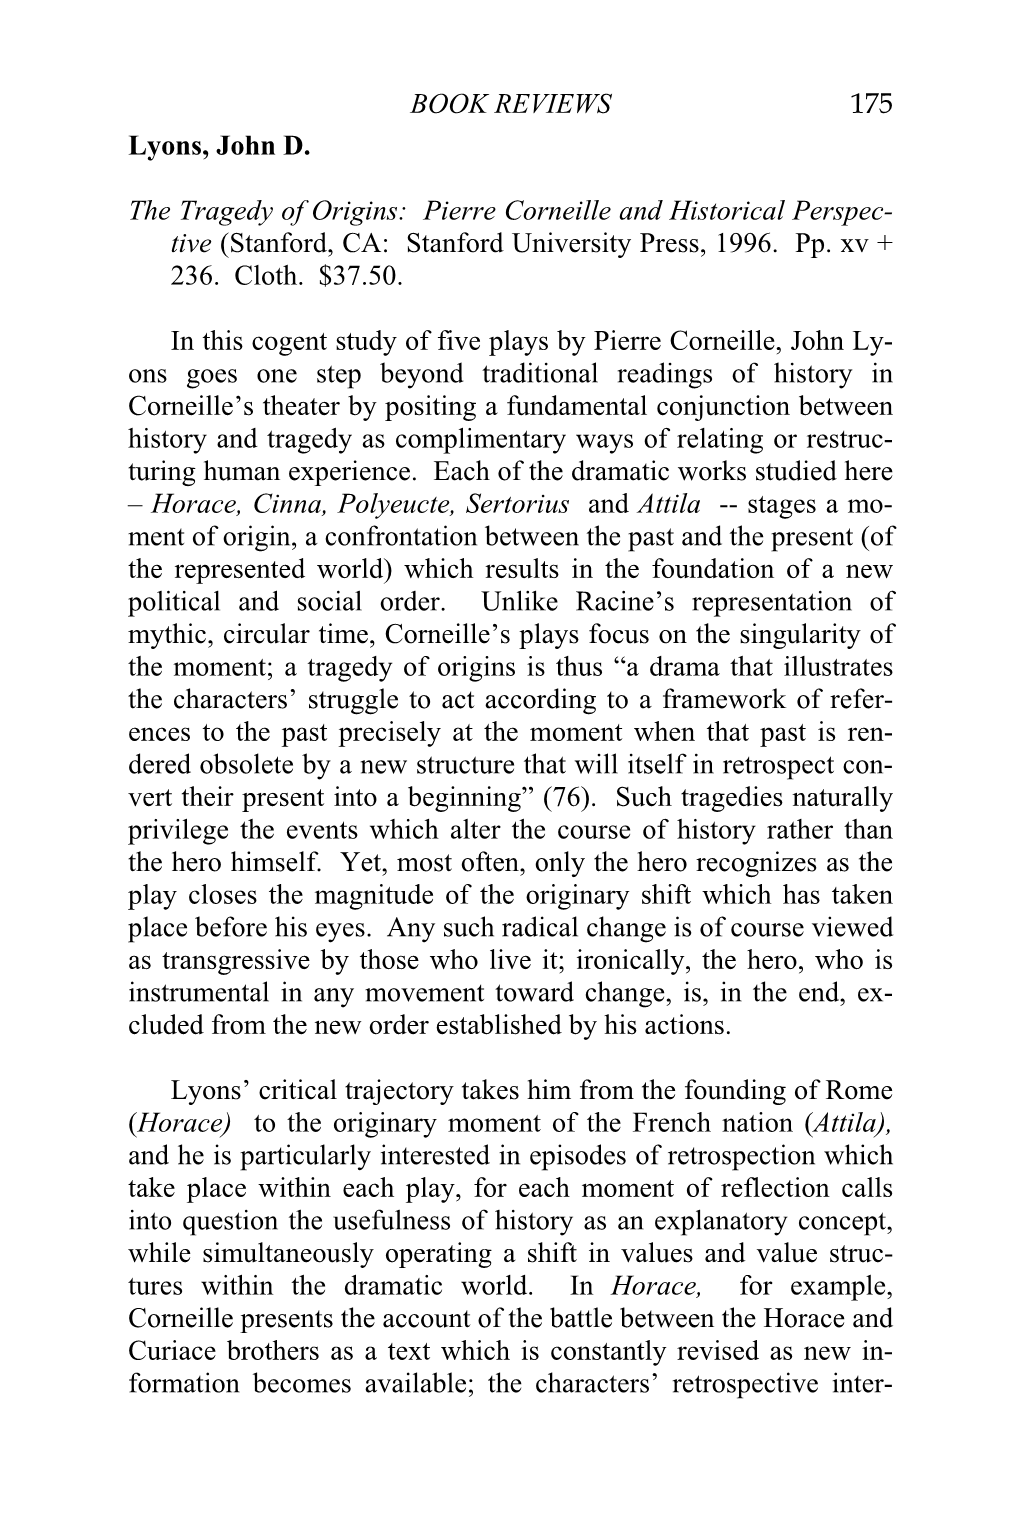 BOOK REVIEWS 175 Lyons, John D. the Tragedy of Origins: Pierre Corneille and Historical Perspec- Tive (Stanford, CA: Stanford